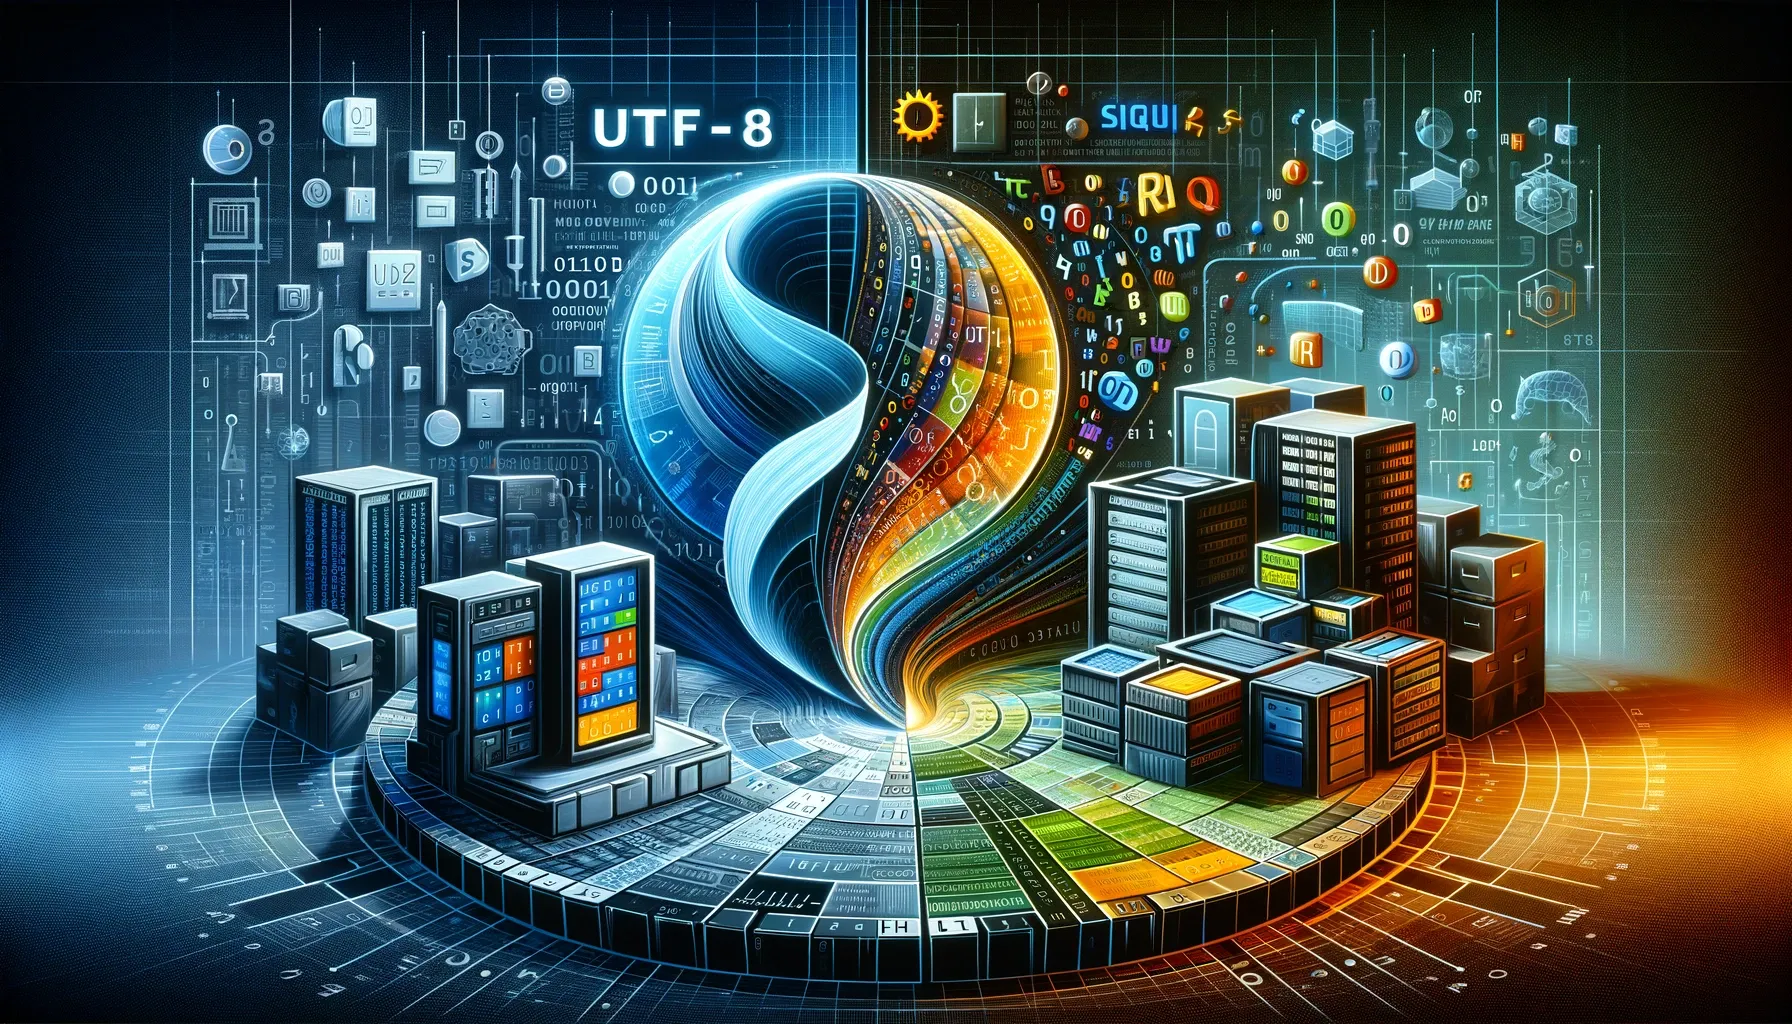 Difference Between UTF-8 and SQL Server